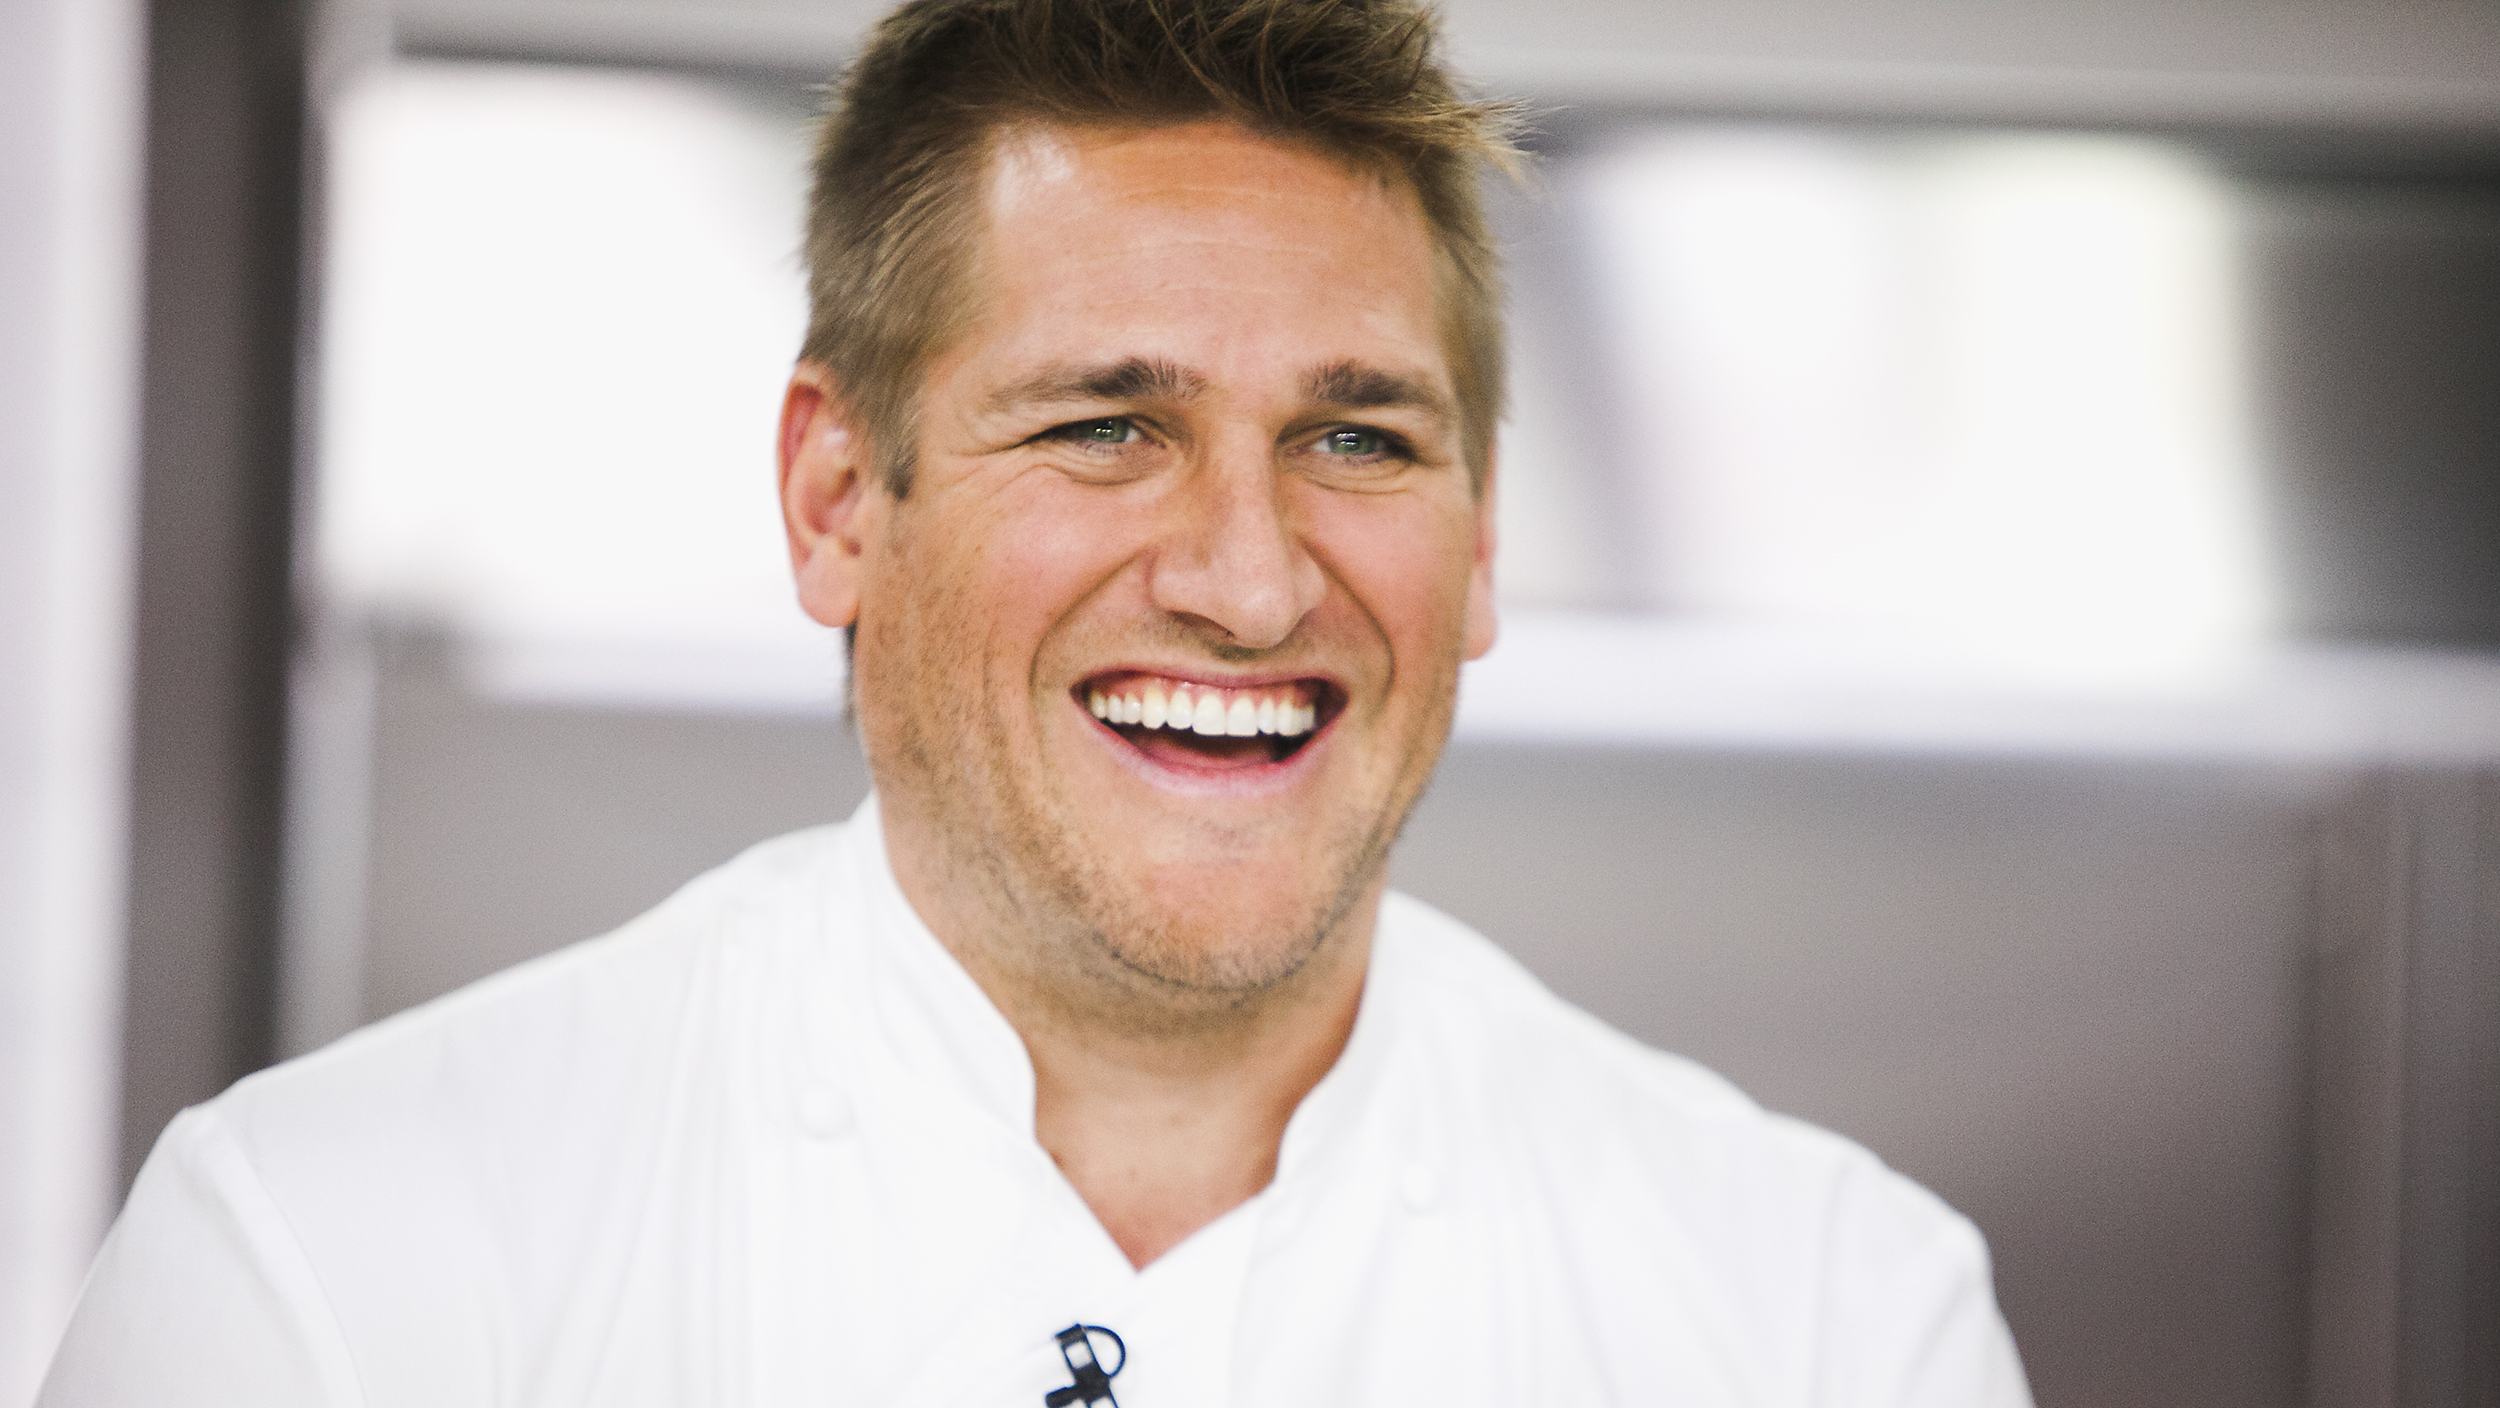 Make-ahead dinner tips from chef Curtis Stone